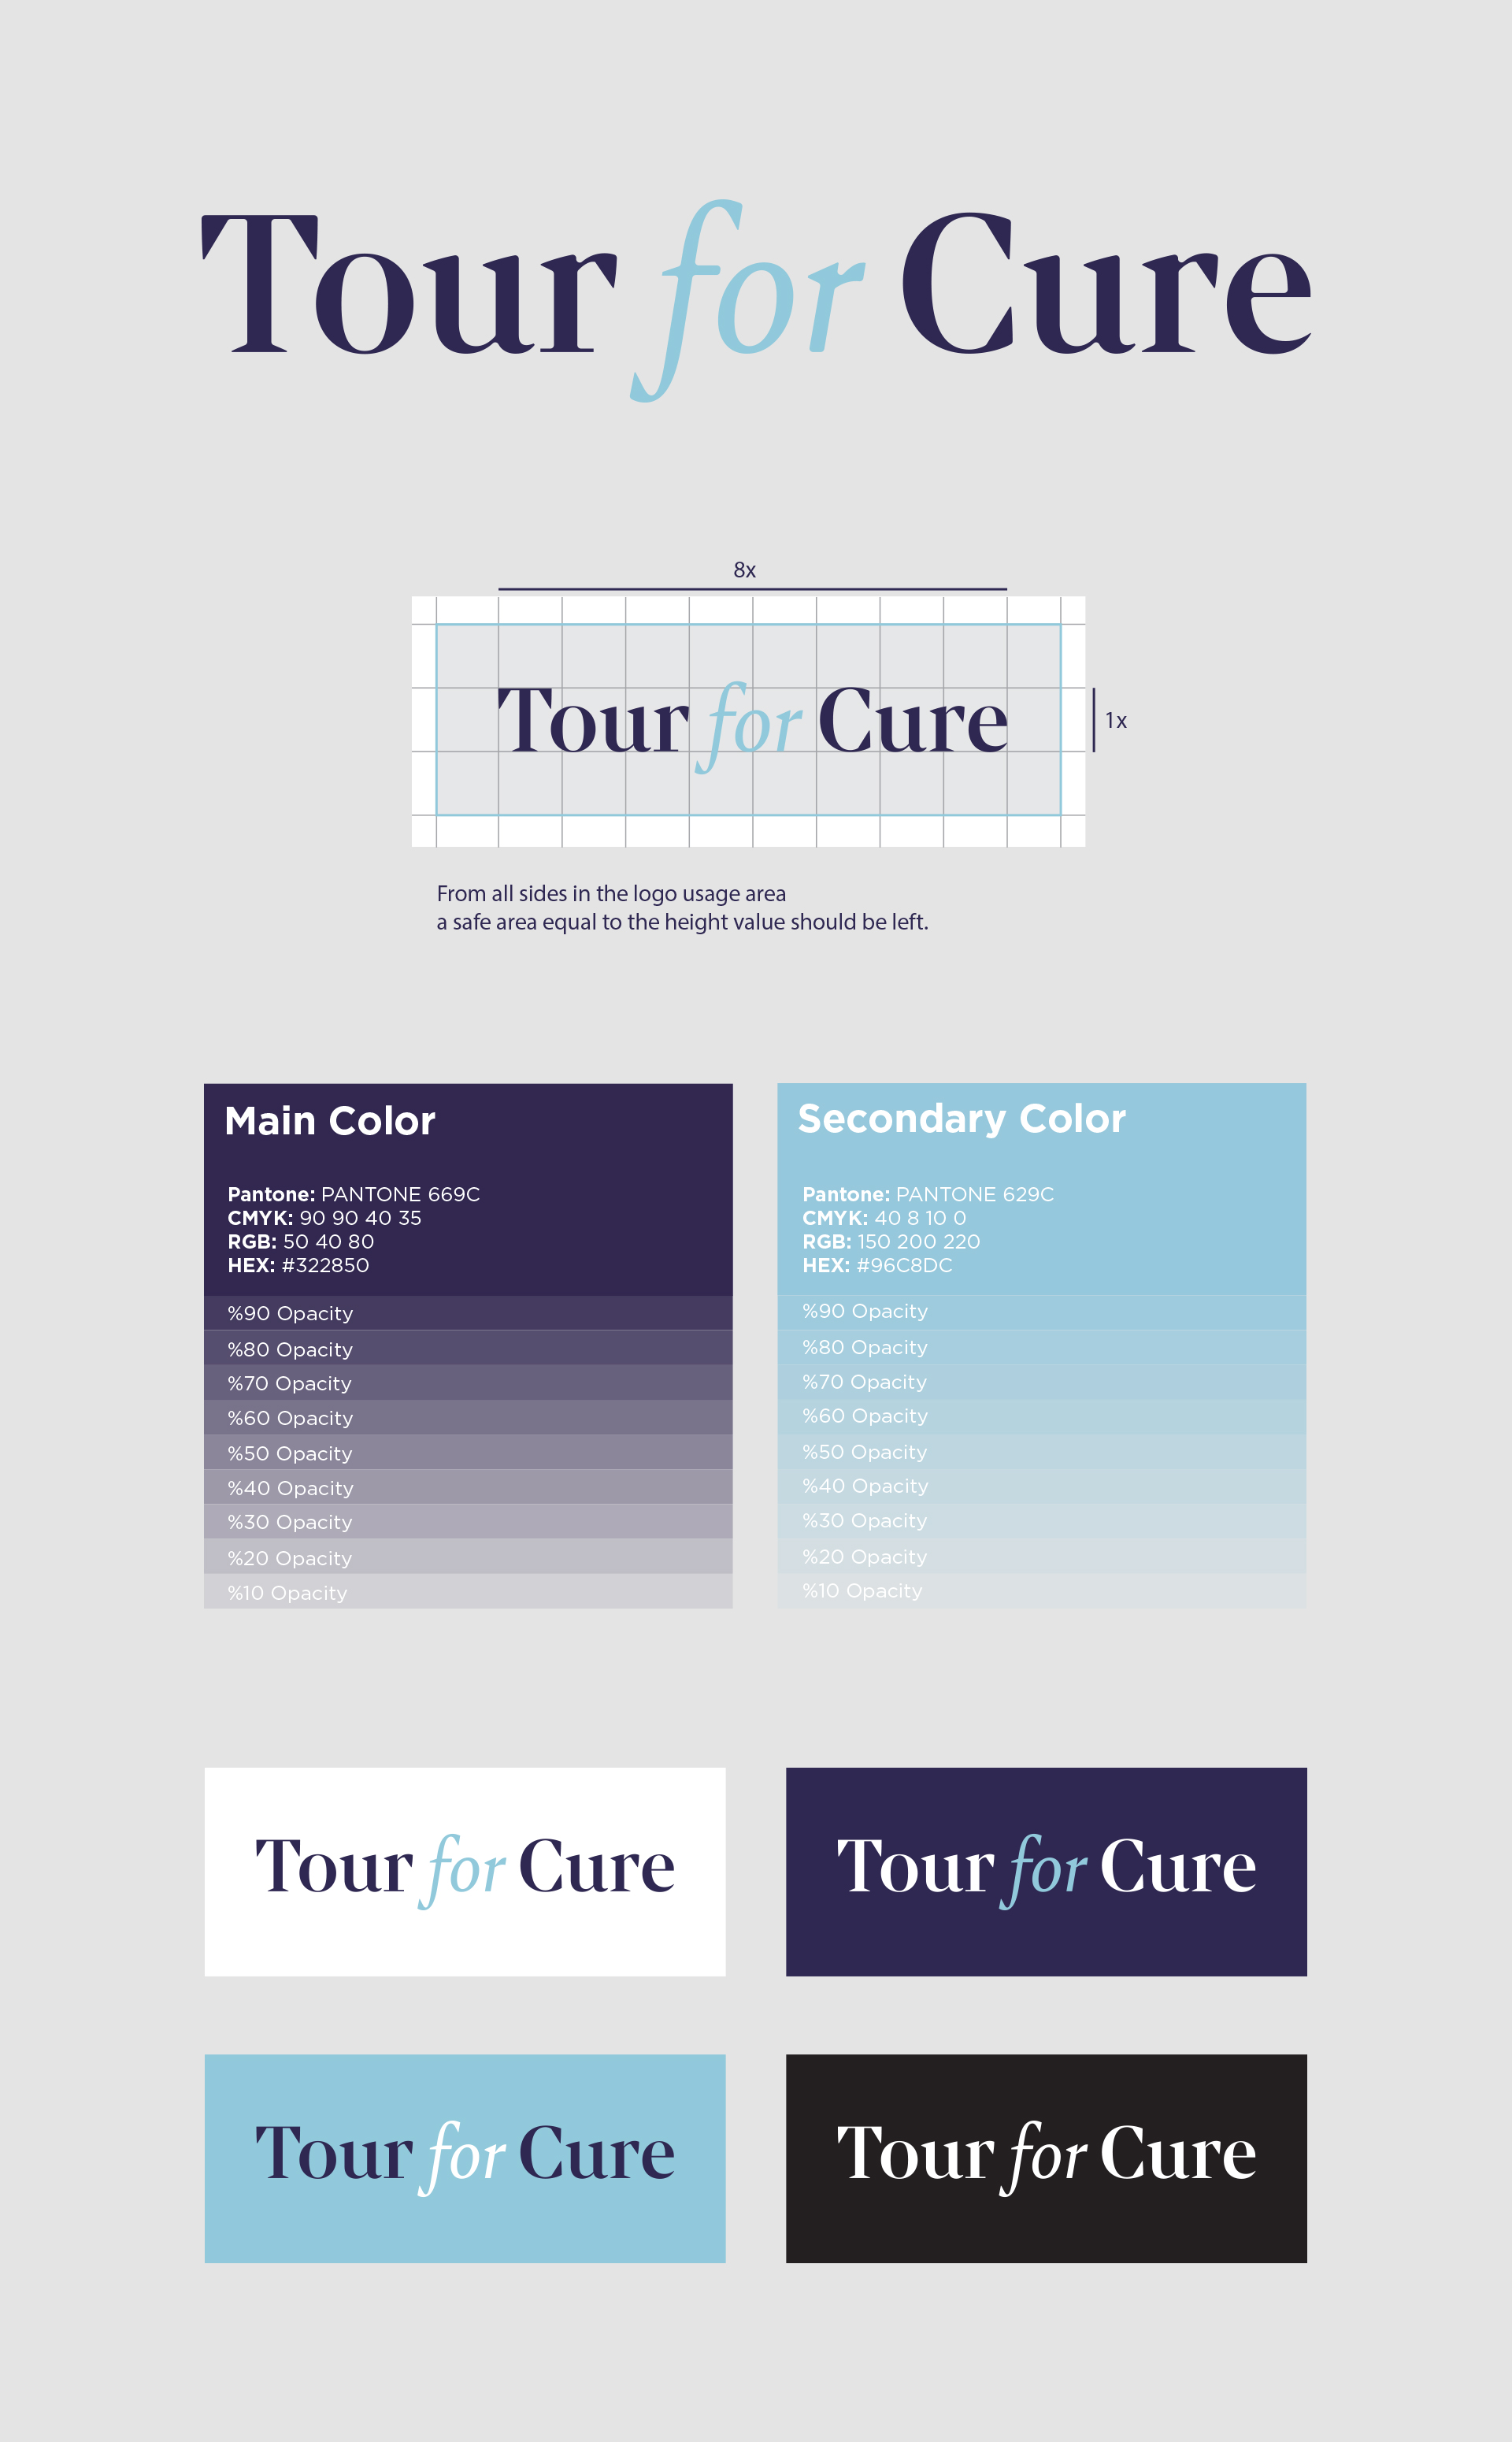 Tour for Cure